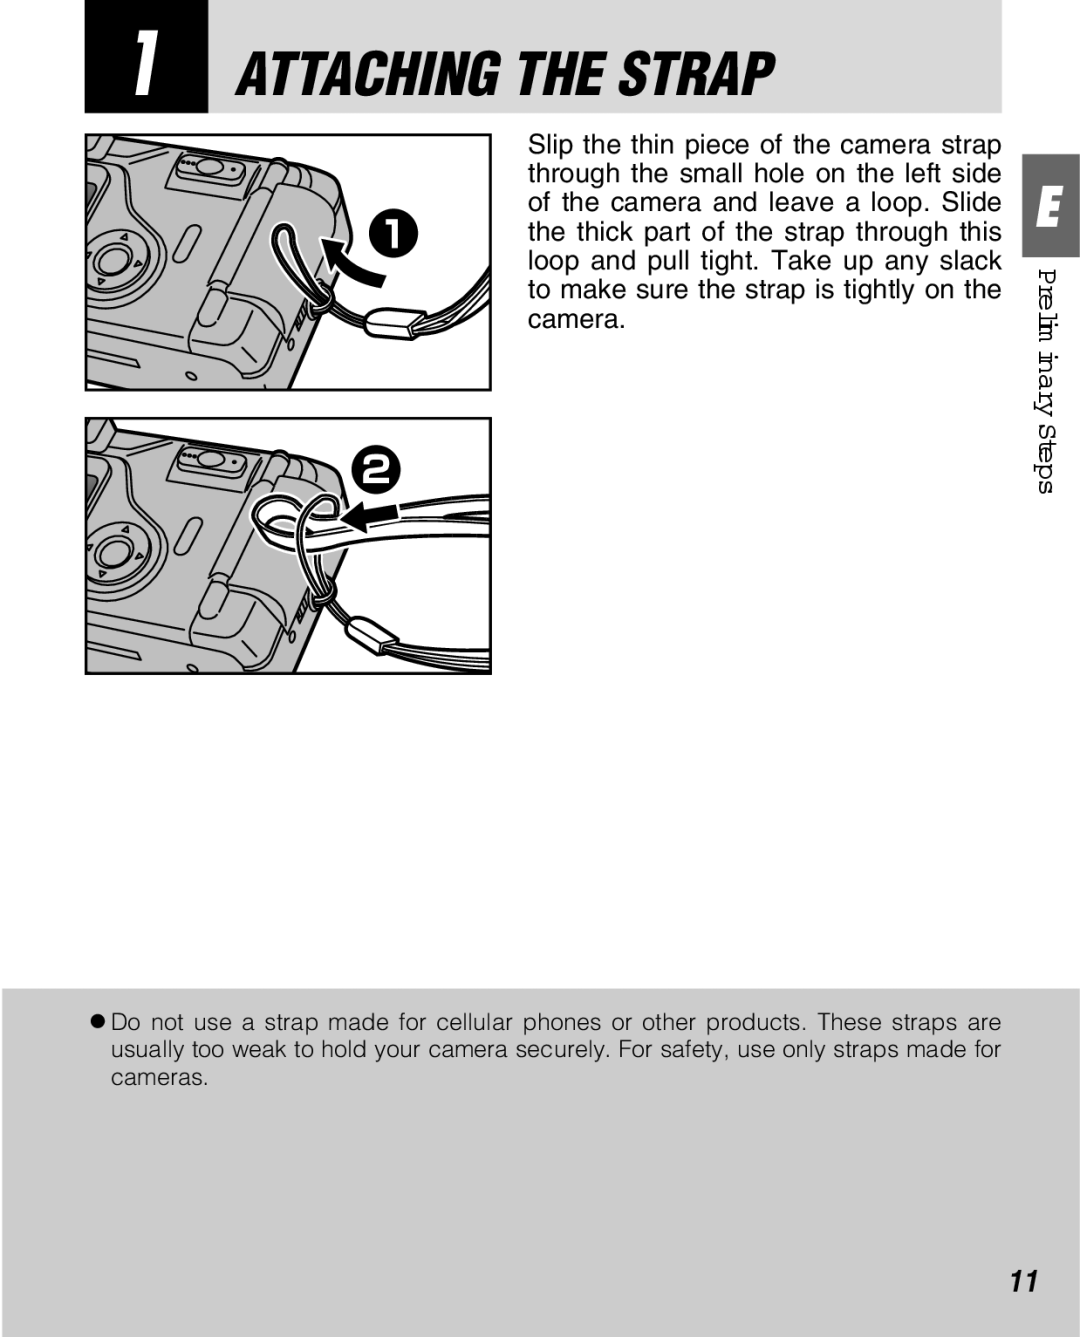 FujiFilm Zoom Date 160ez owner manual Attaching The Strap, Prelim inary Steps 